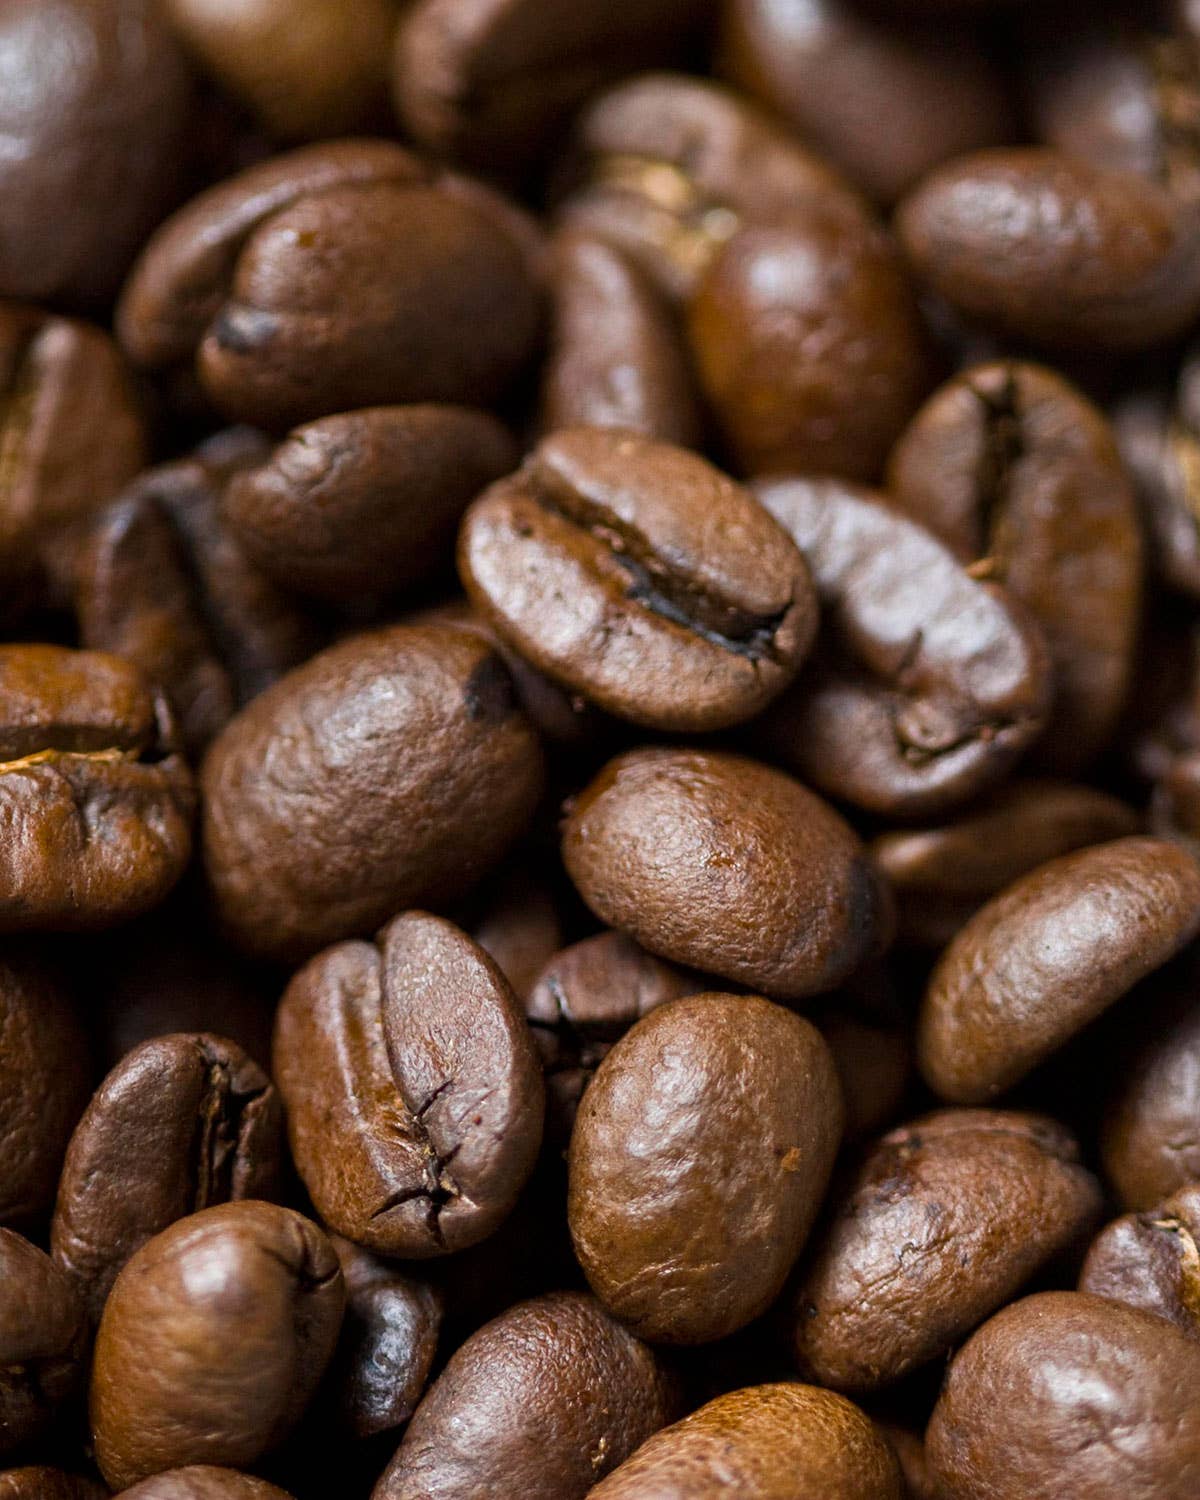 Could California be the Next Coffee Capital of the World?